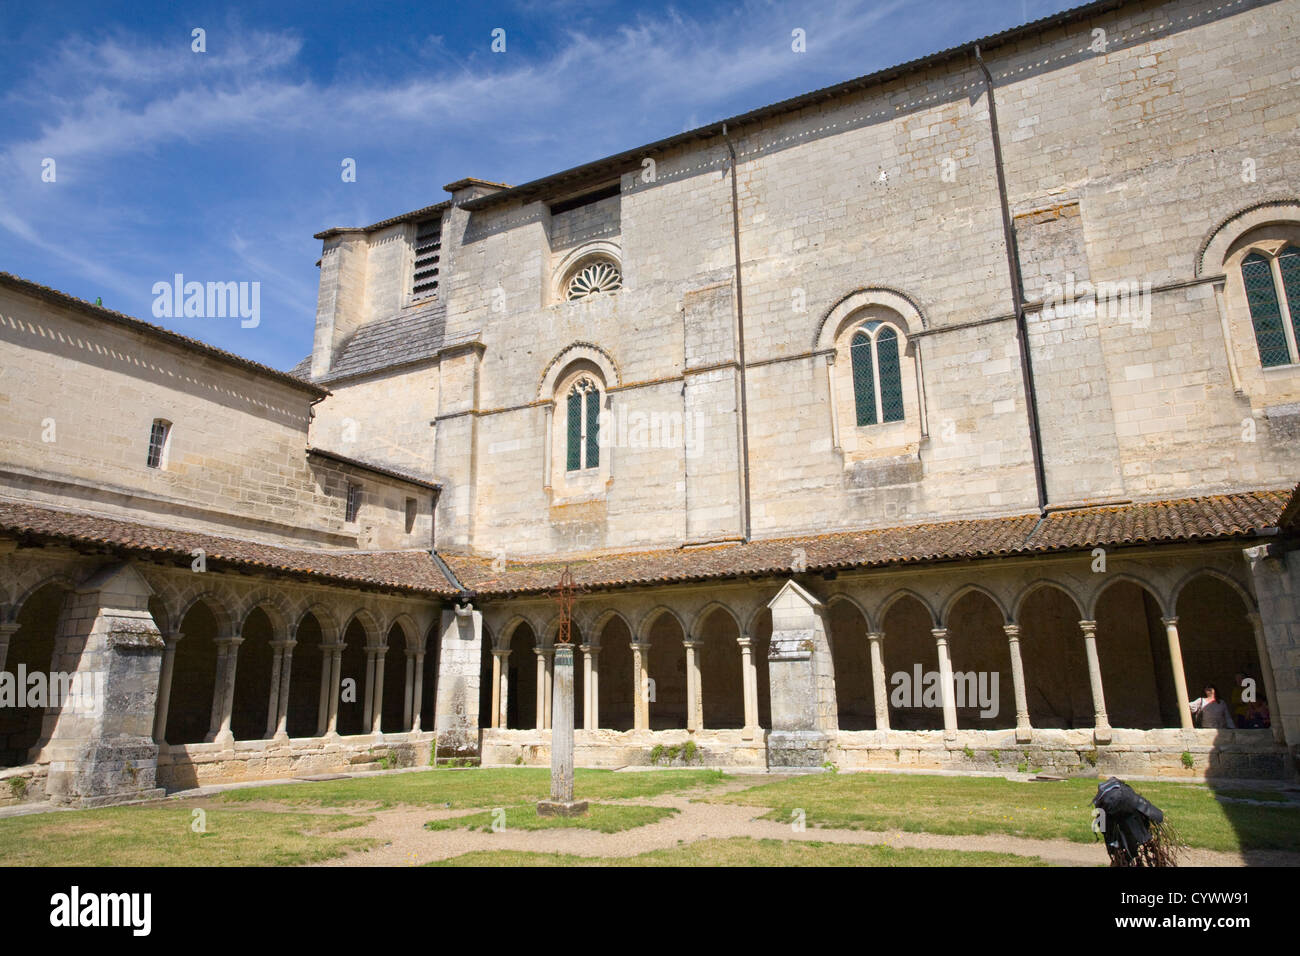 Cloister of the Eglise Collegiale in Saint-Emilion, Gironde, France Stock Photo